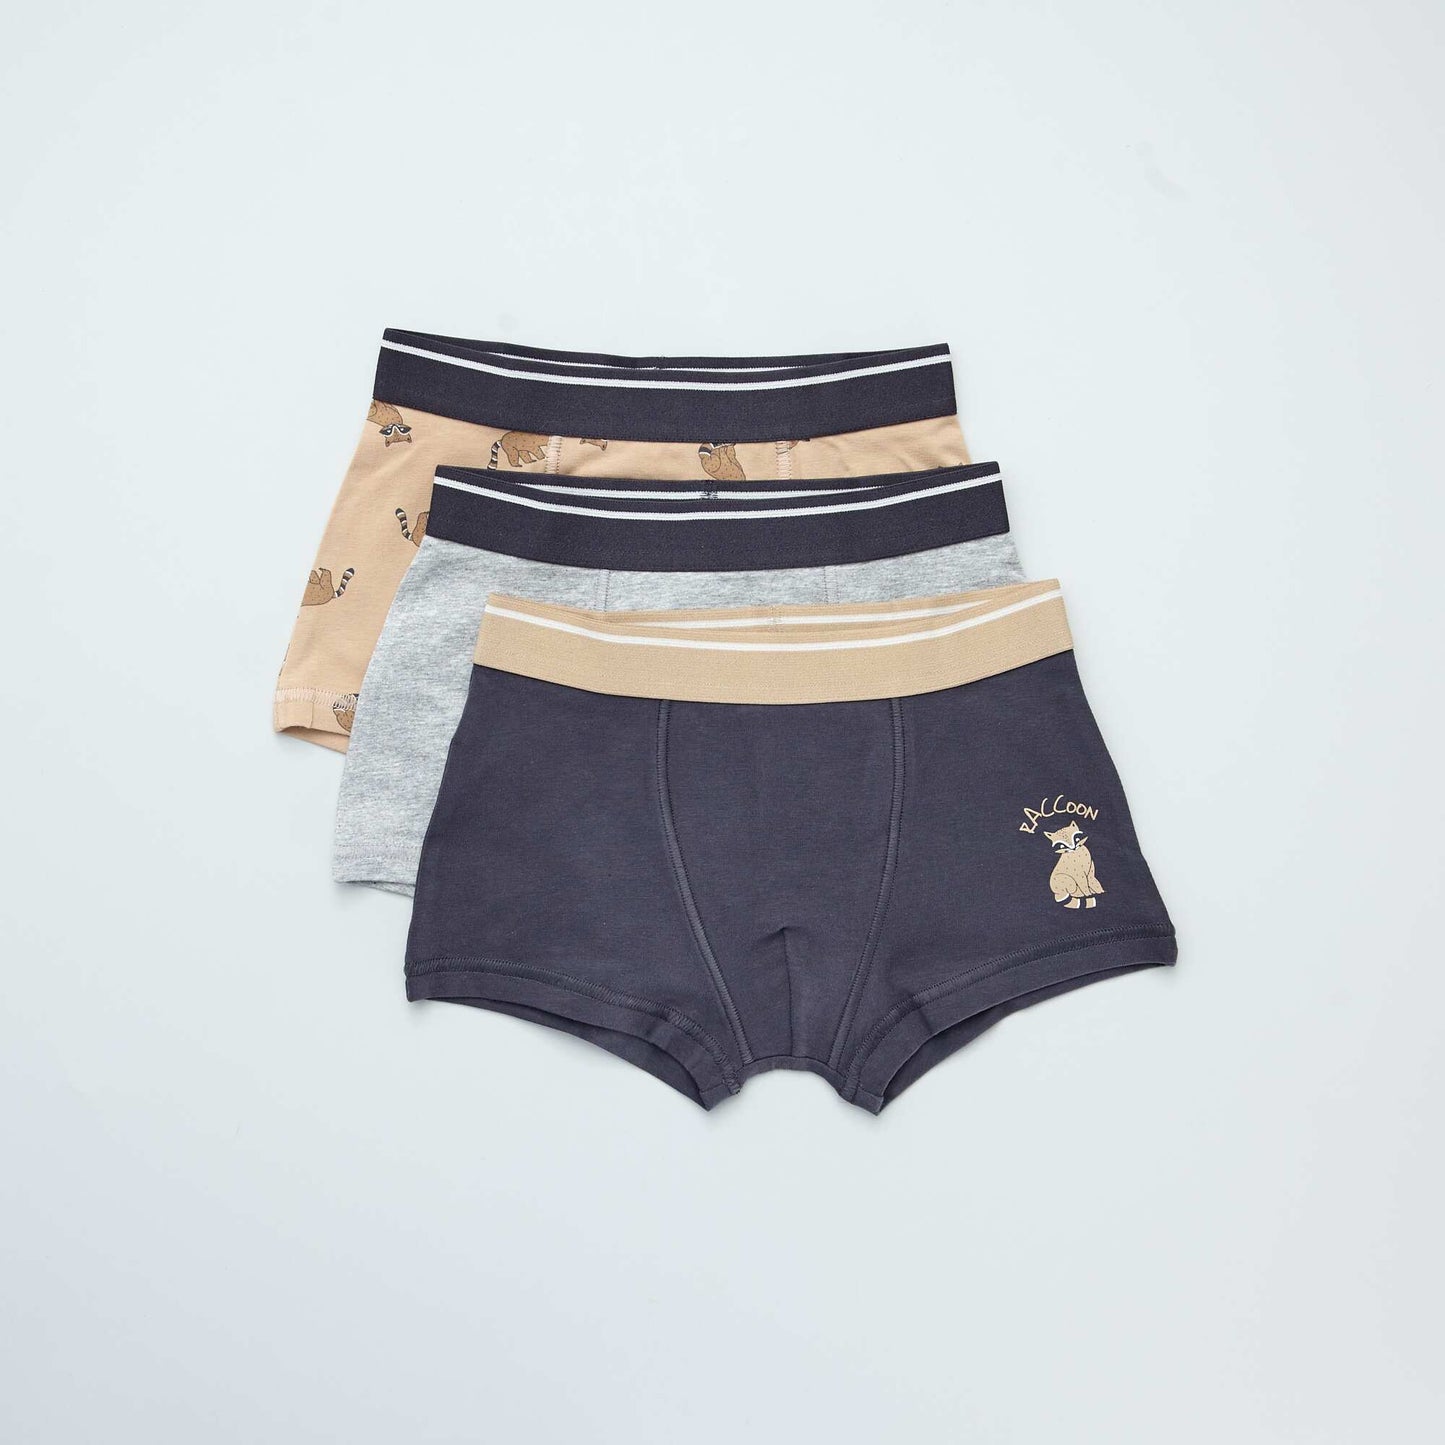 Pack of 3 pairs of boxer shorts BROWN